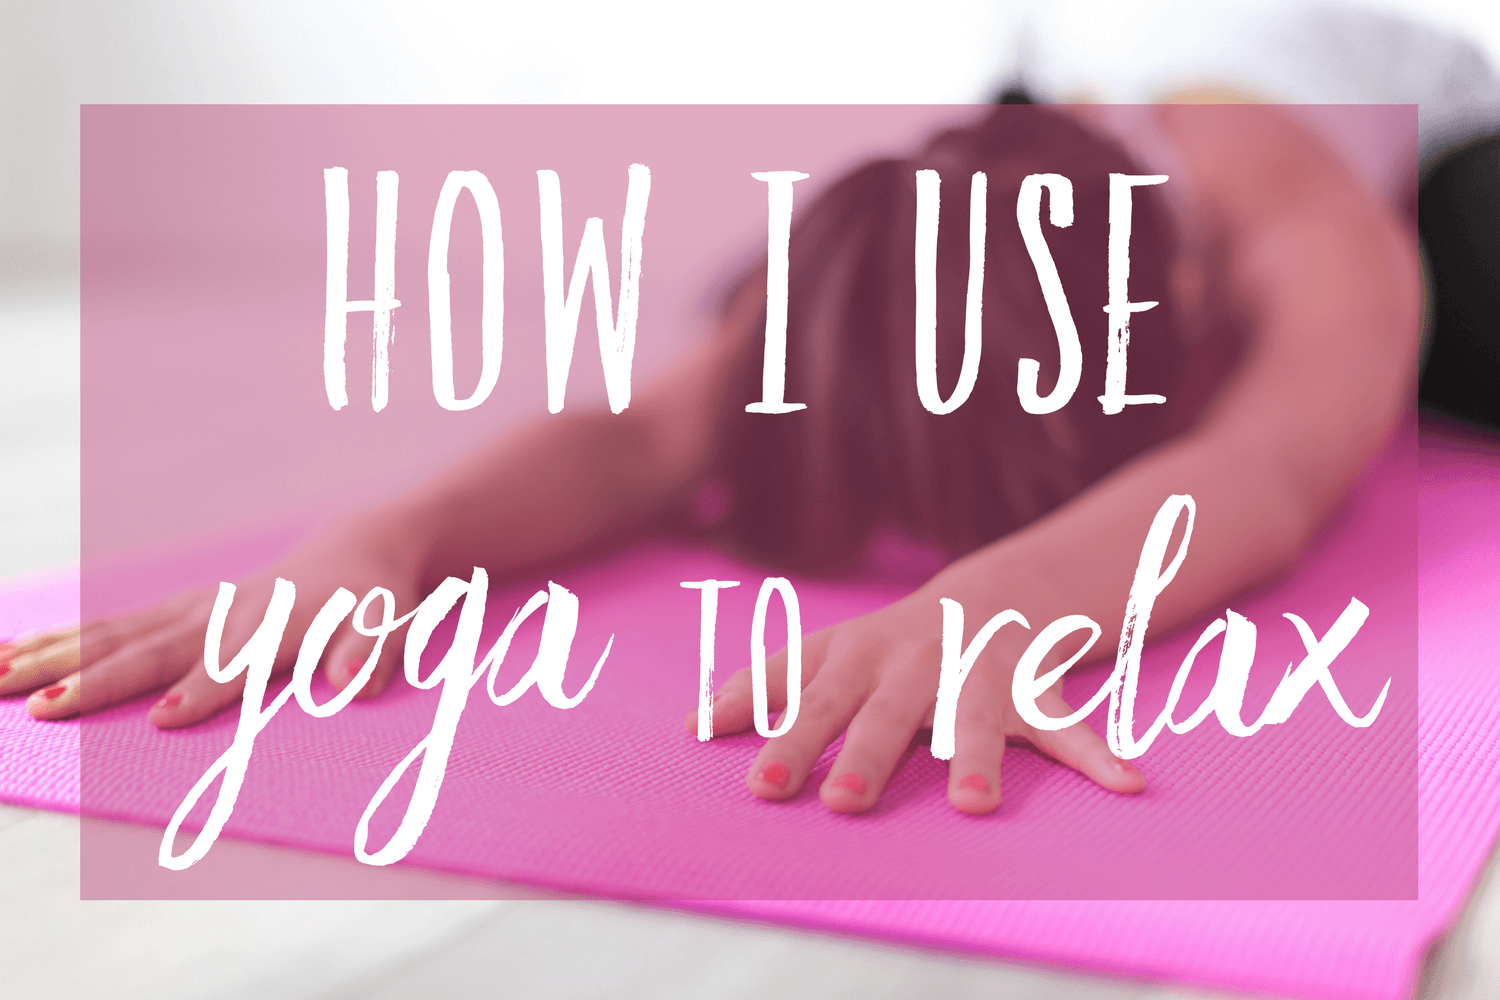 How I use yoga to relax